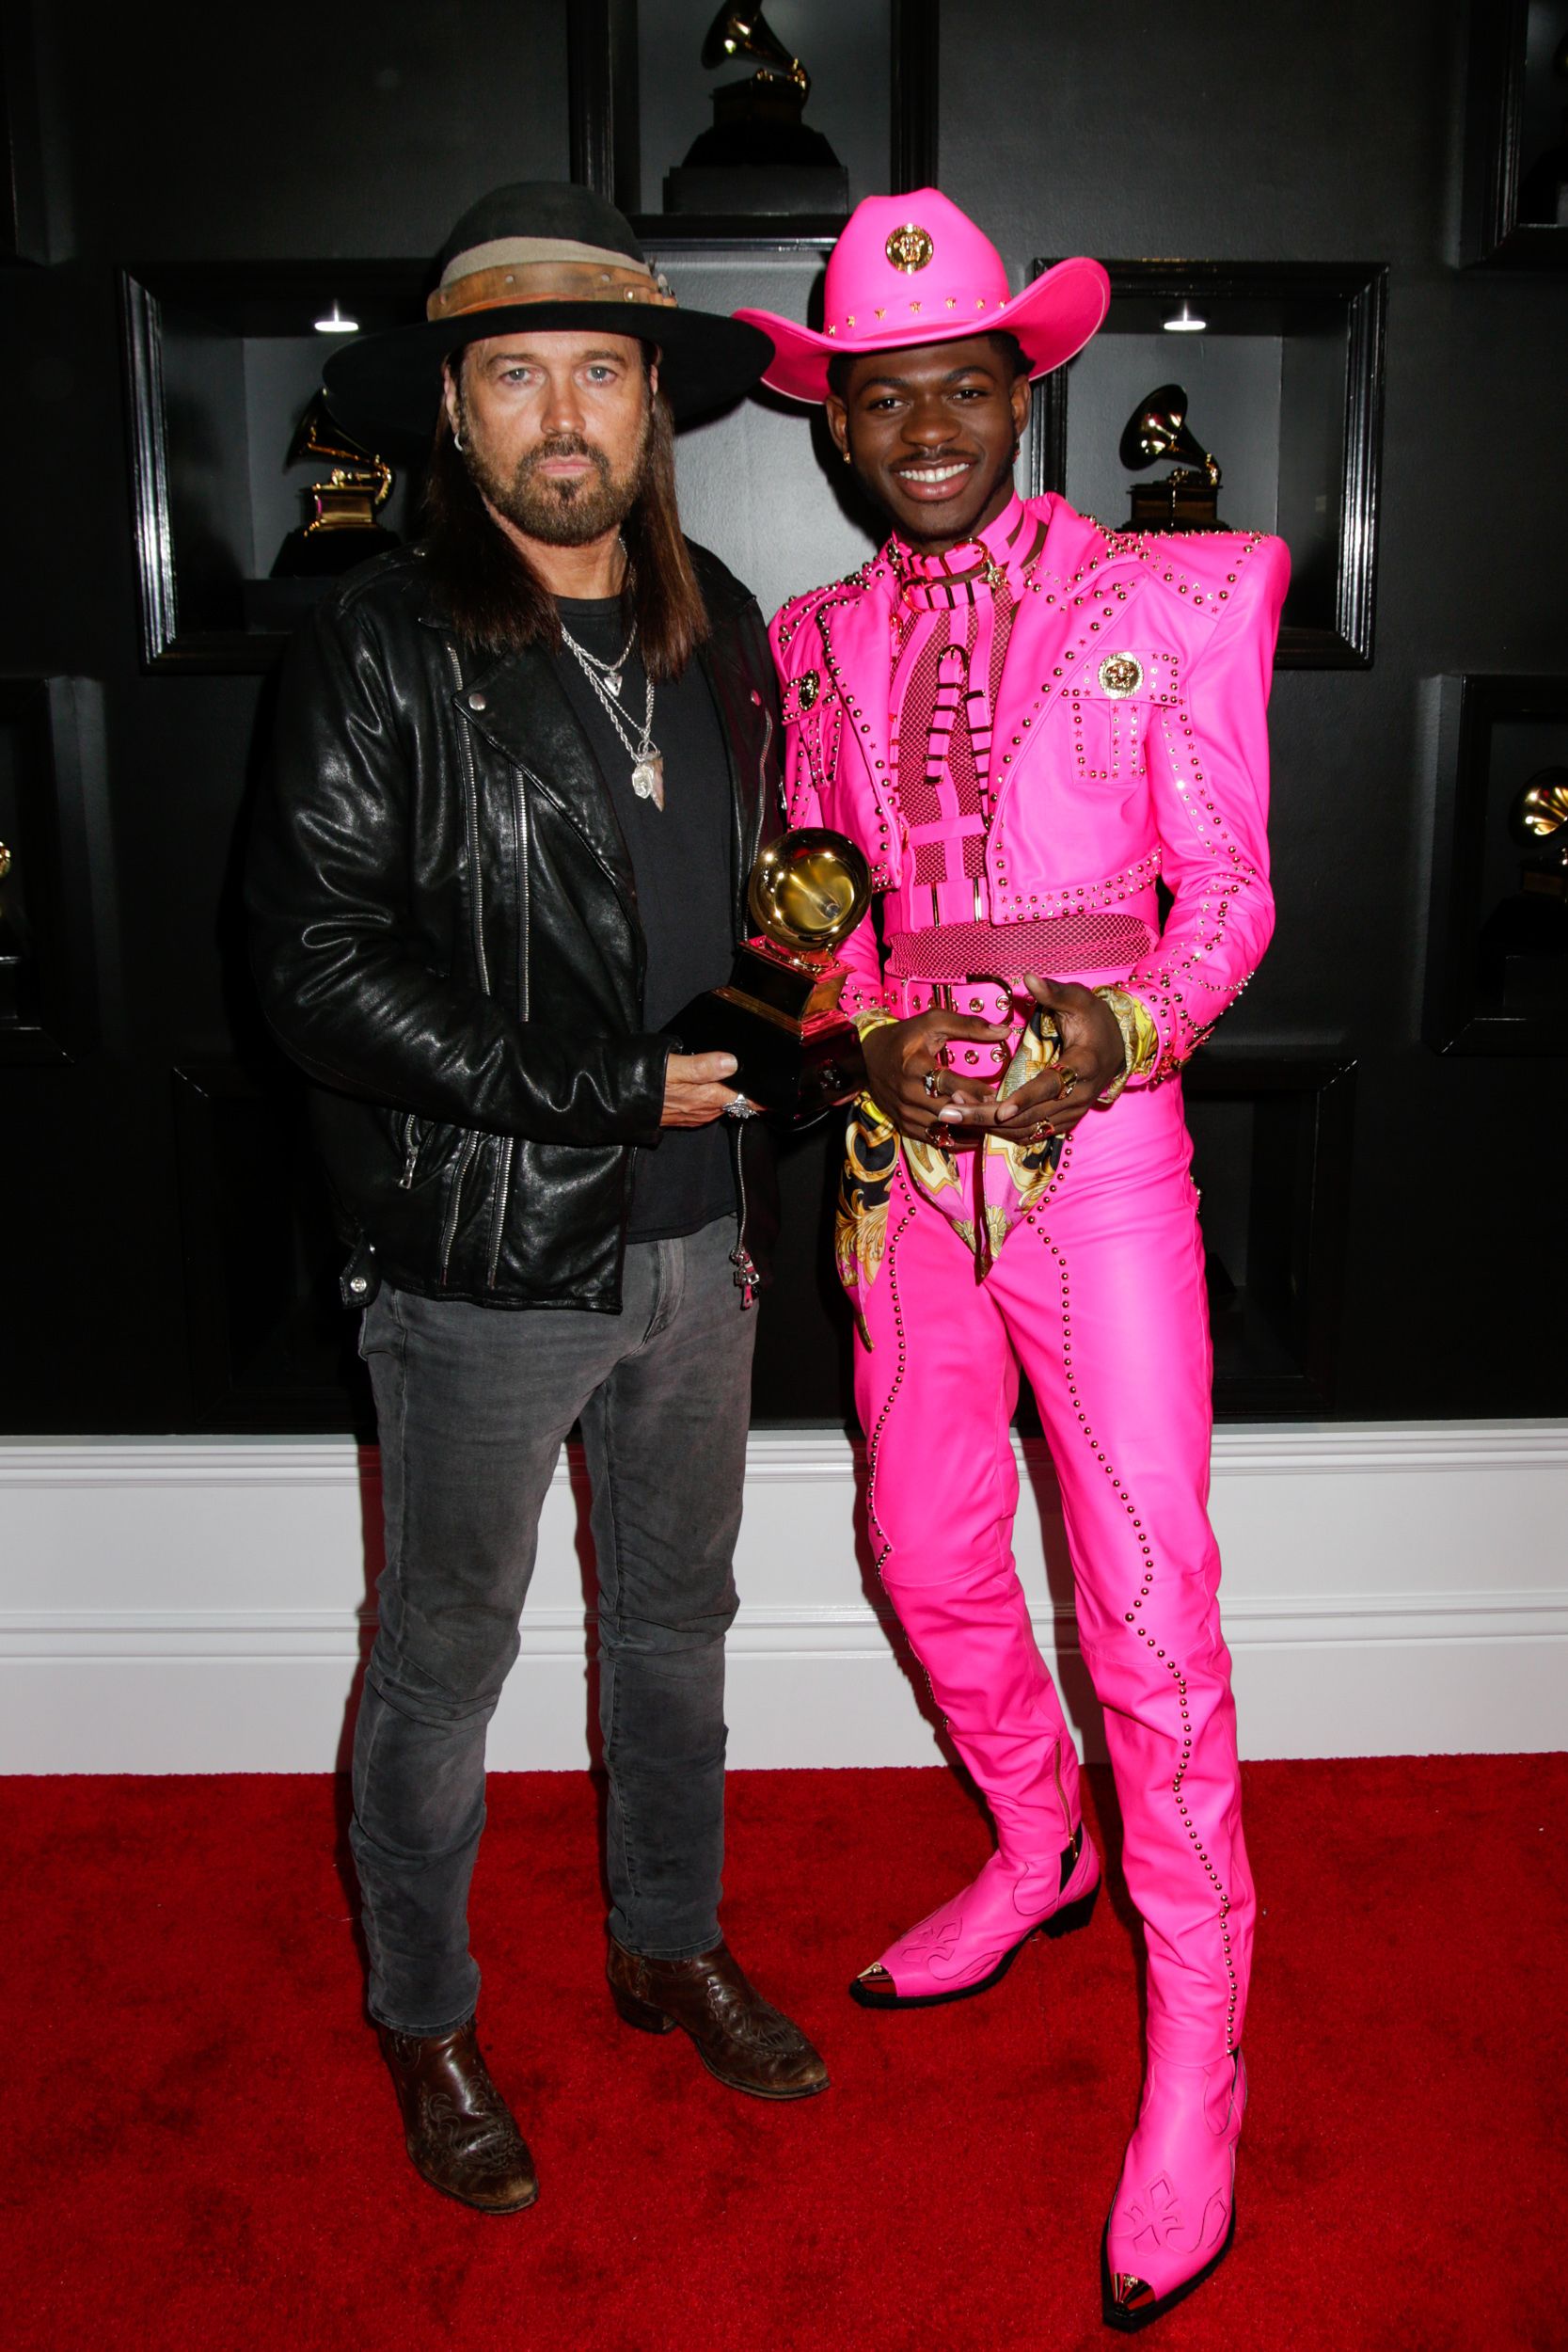 Billy Ray Cyrus 'Would Die' for Lil Nas X